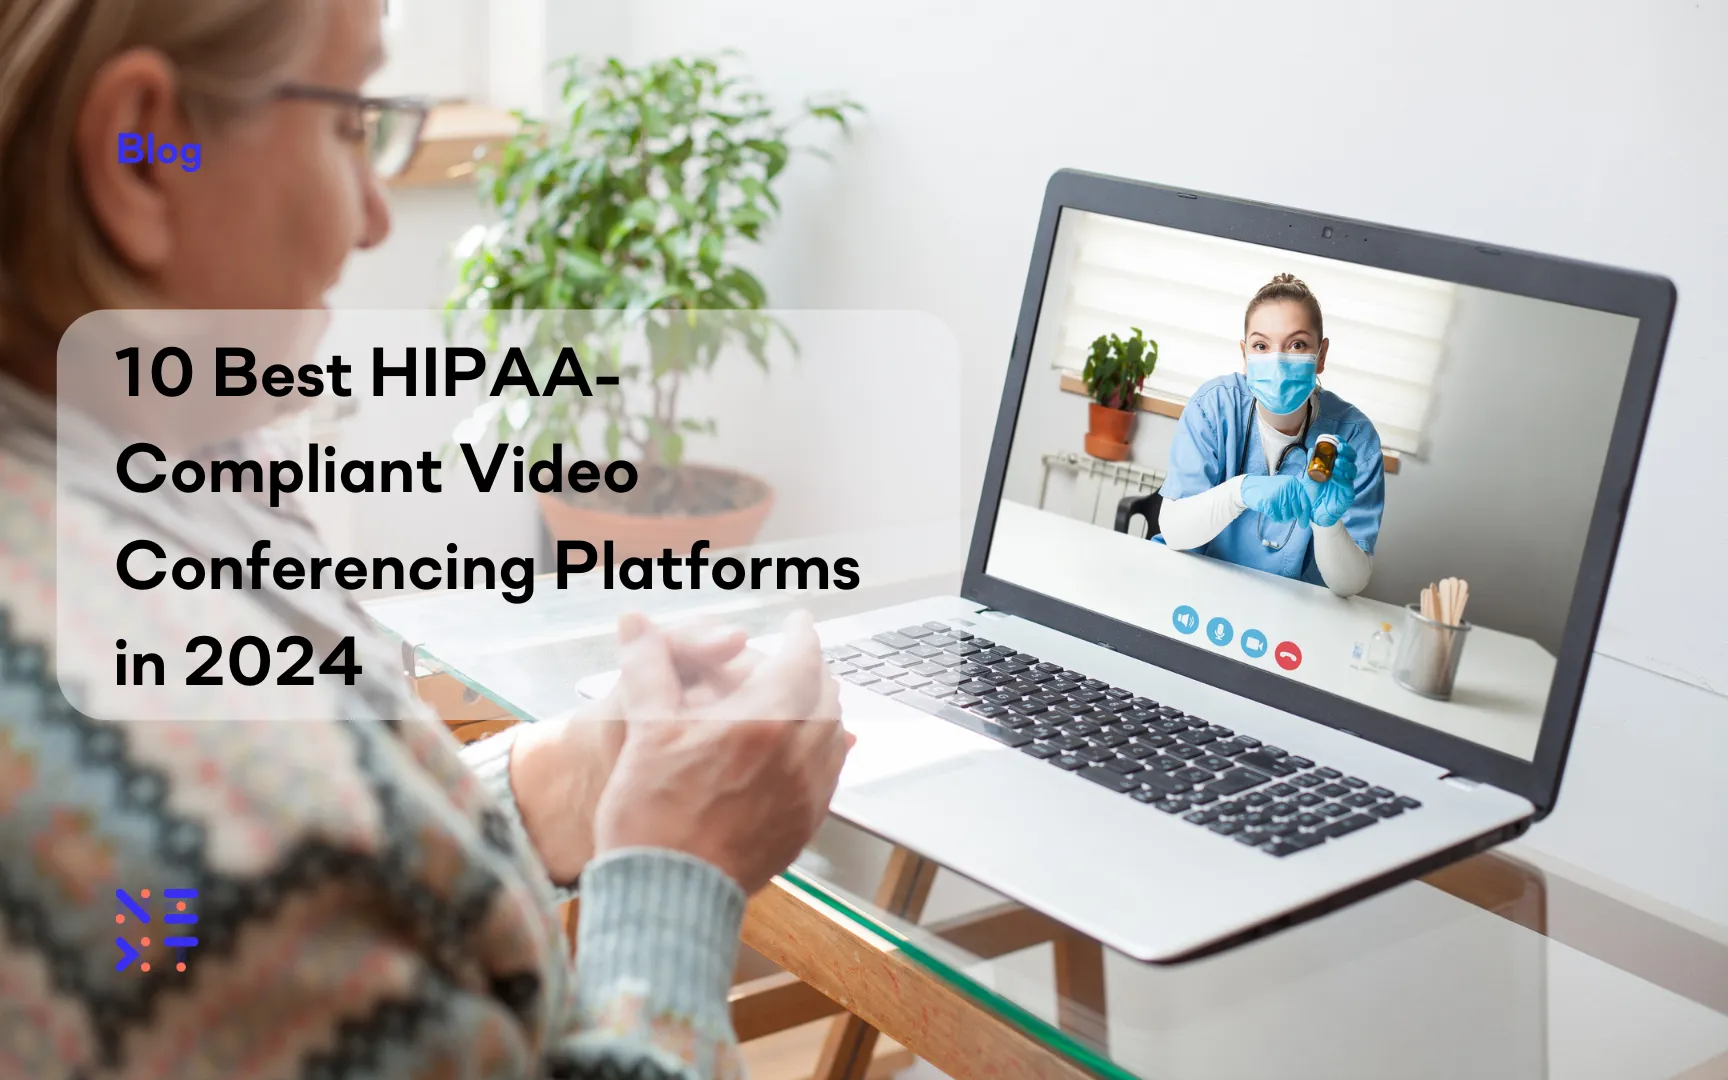 10 best HIPAA-compliant video conferencing platforms in 2024